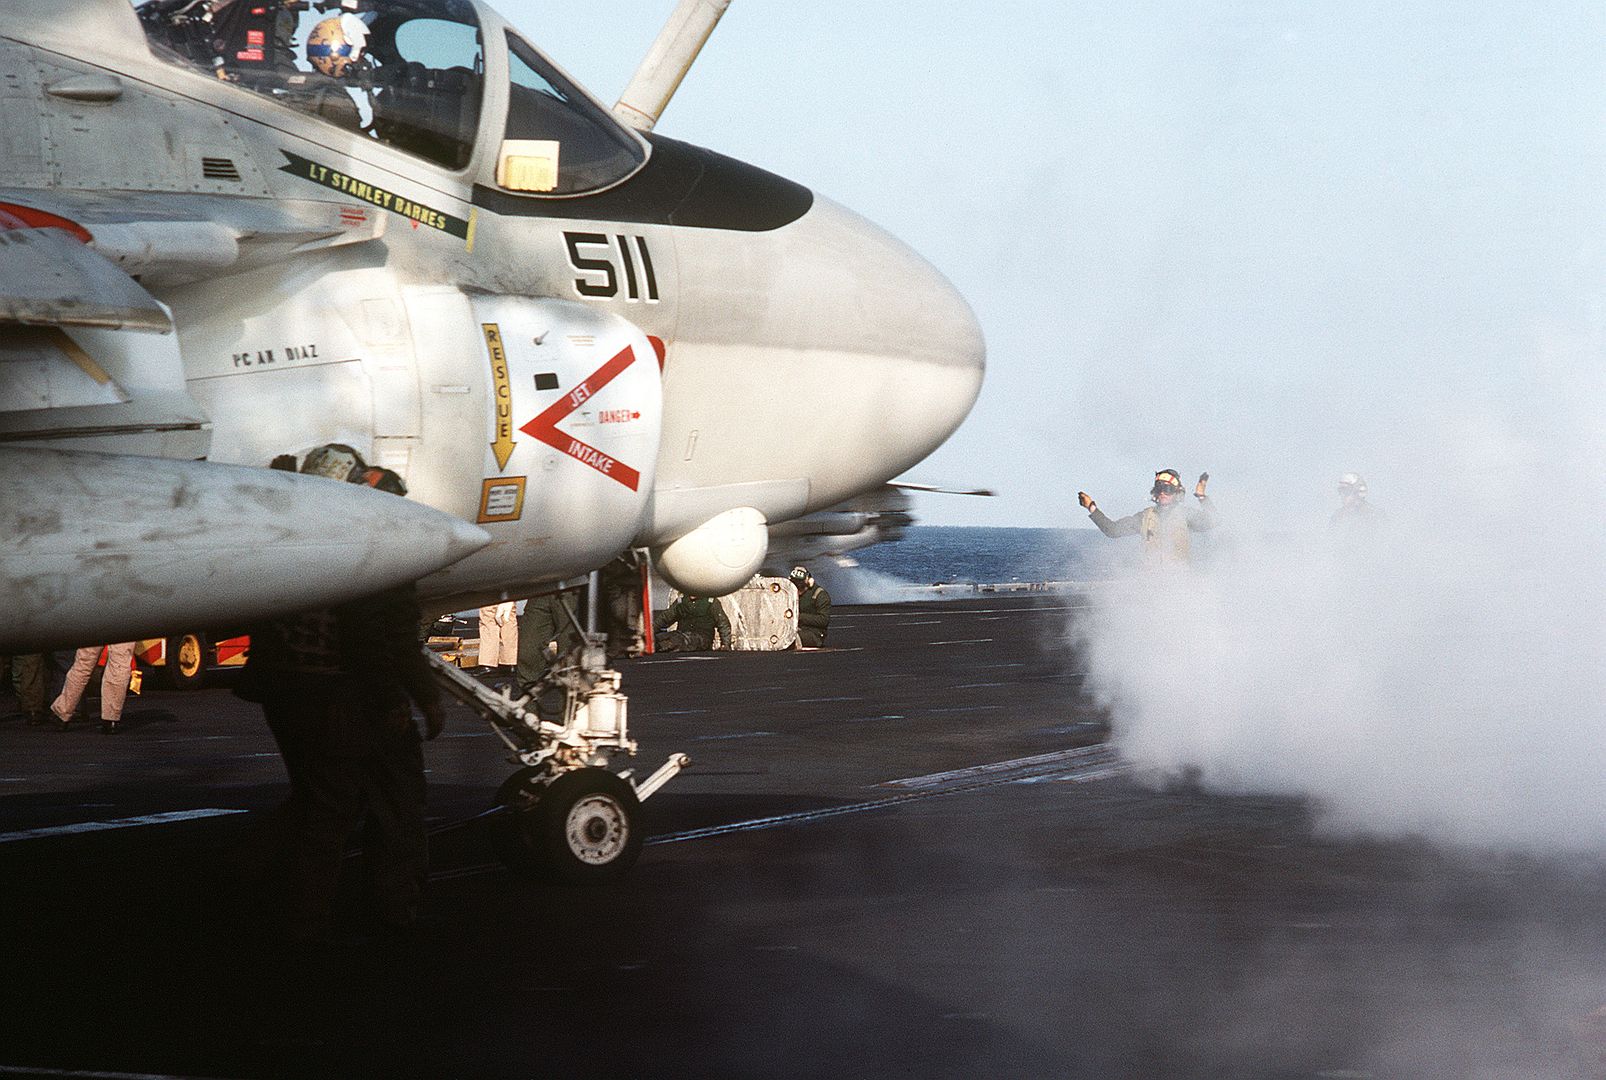 An A 6E Intruder Aircraft Is Positioned On A Catapult During Flight Operations Aboard The Aircraft Carrier USS MIDWAY 